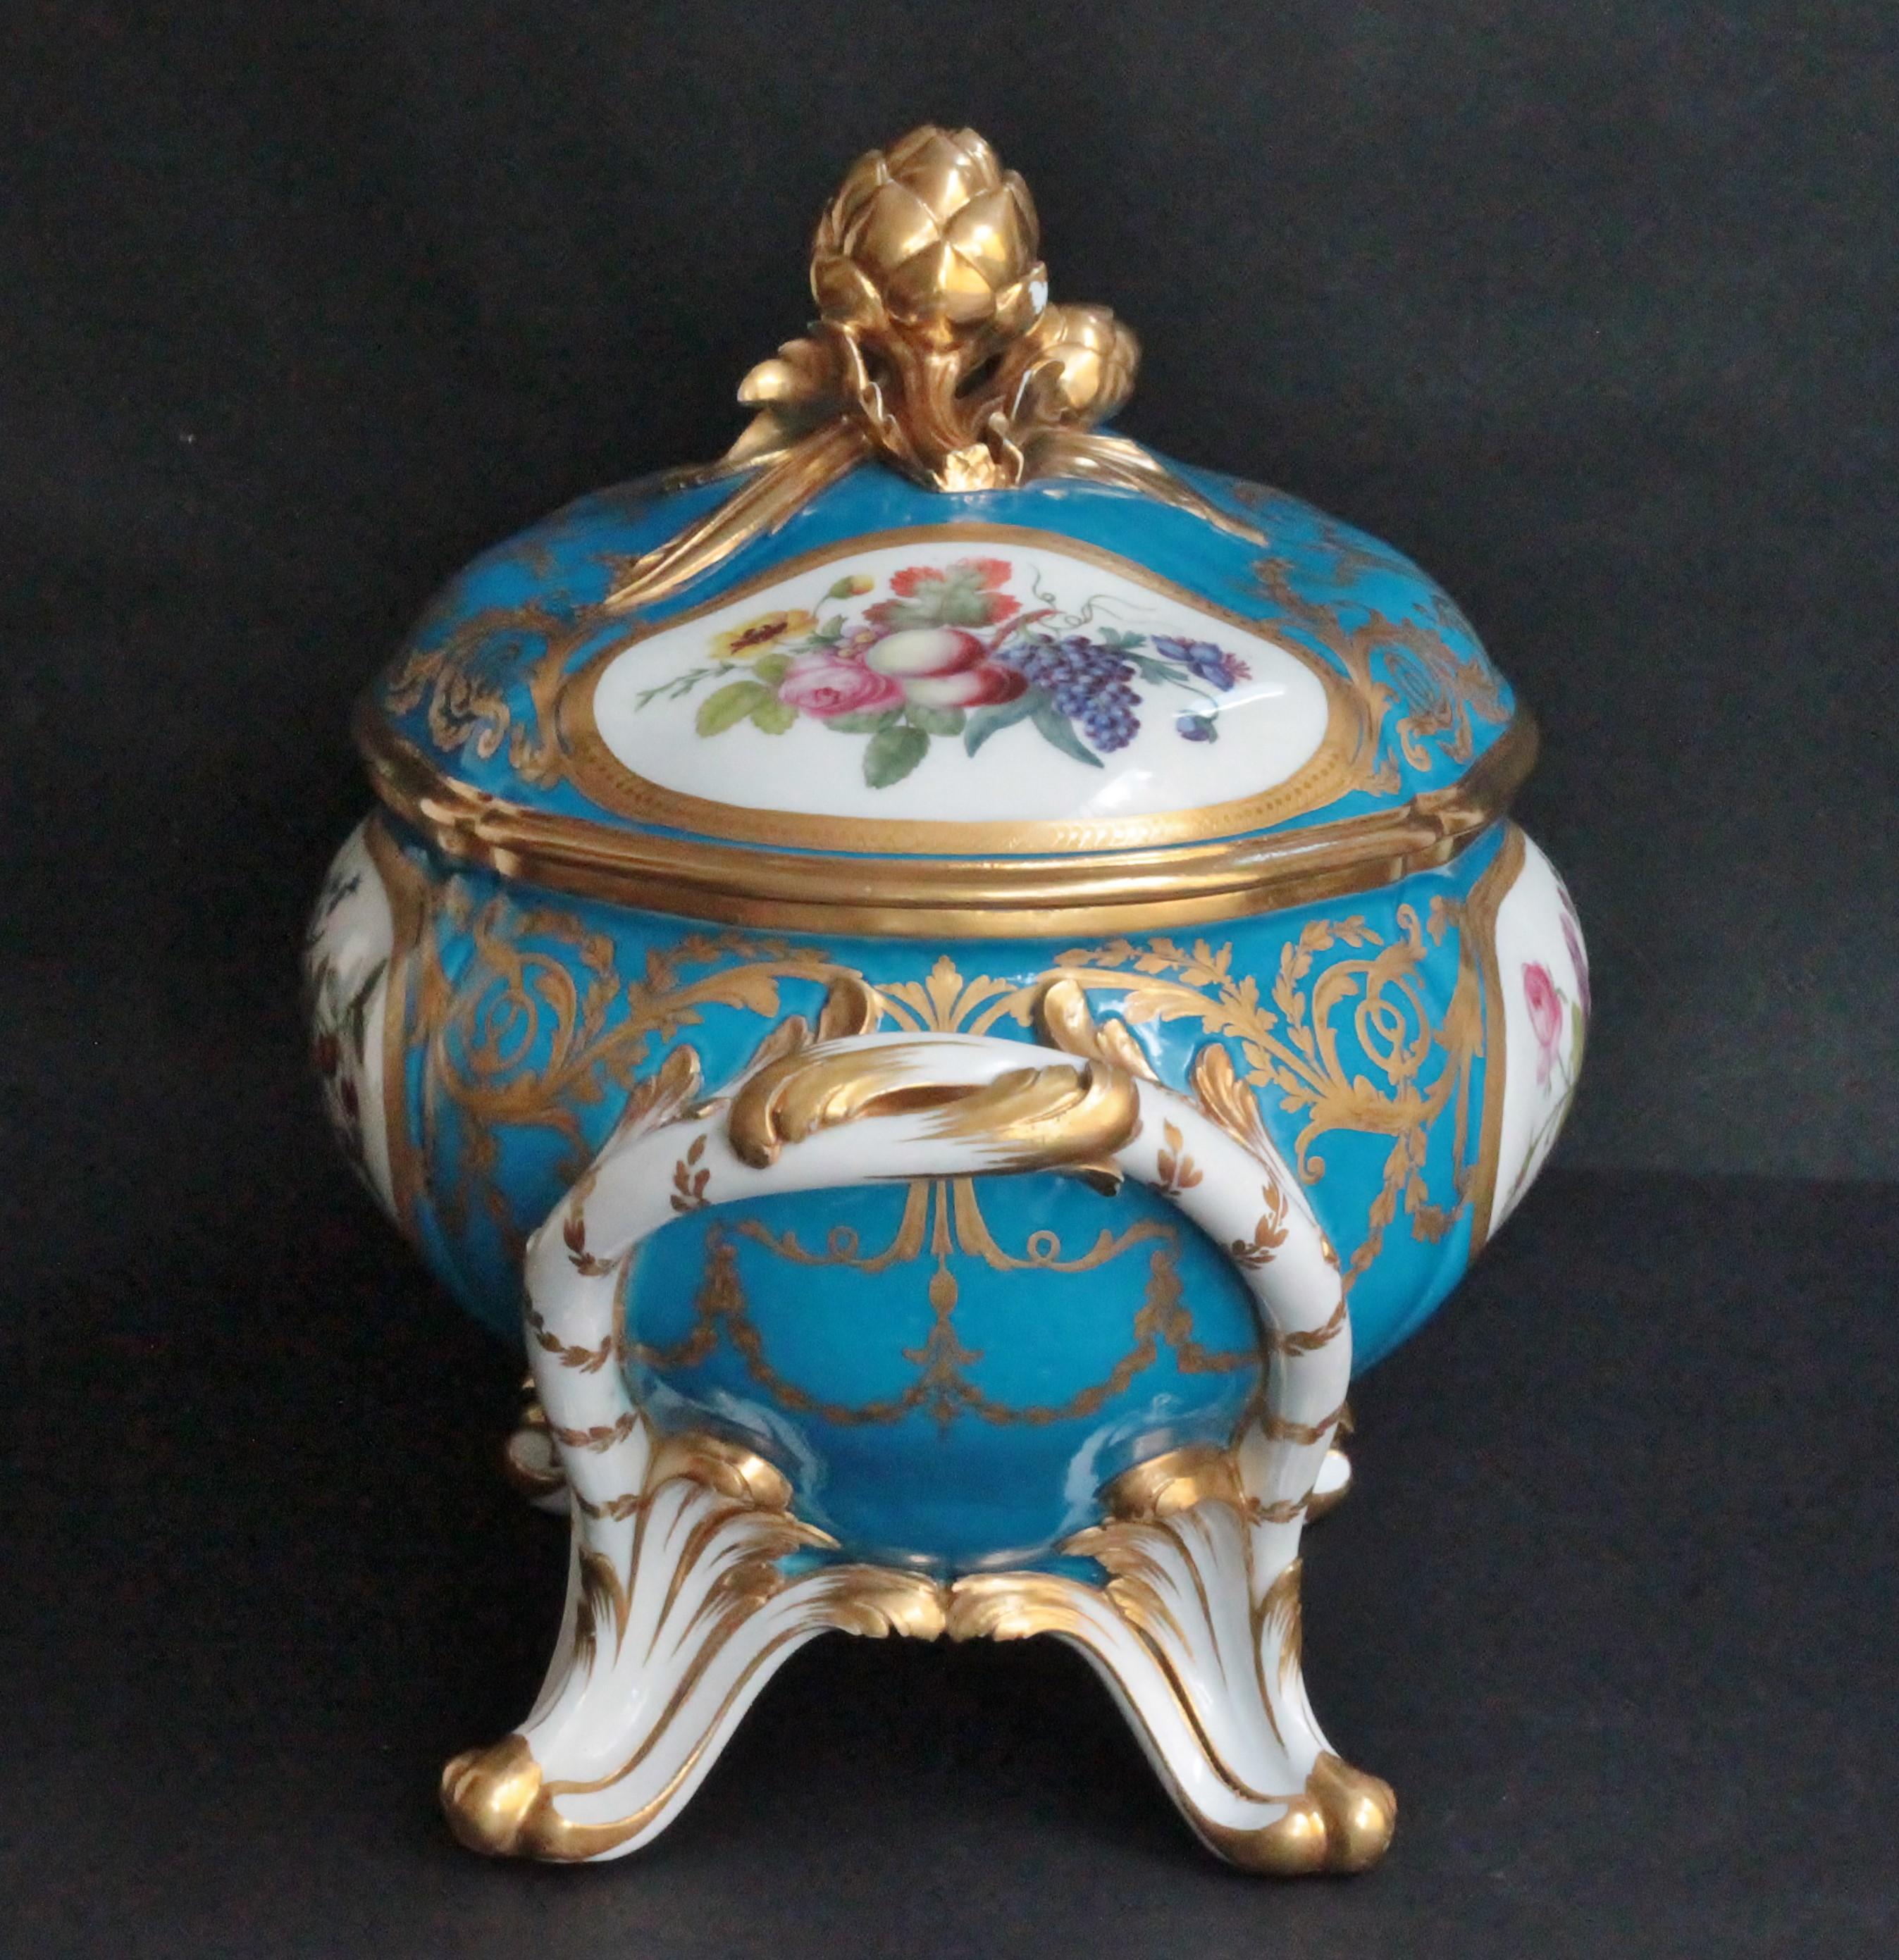 French Oval Tureen and Cover of Sevres Porcelain, Turquoise Blue Ground, 18th Century